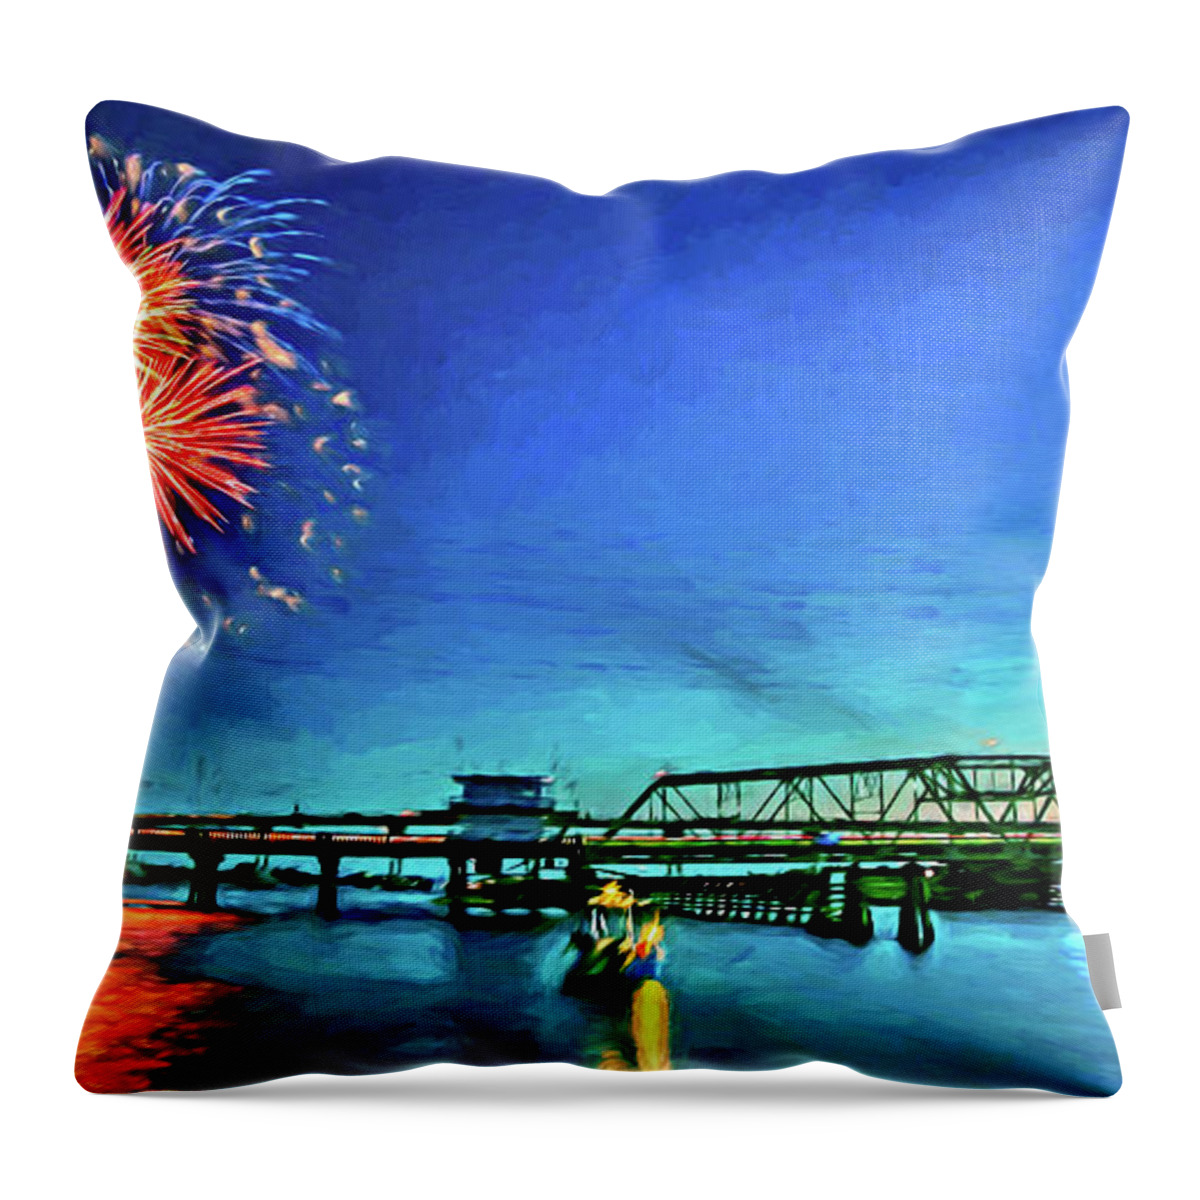 Surf City Throw Pillow featuring the photograph Swan Song by DJA Images